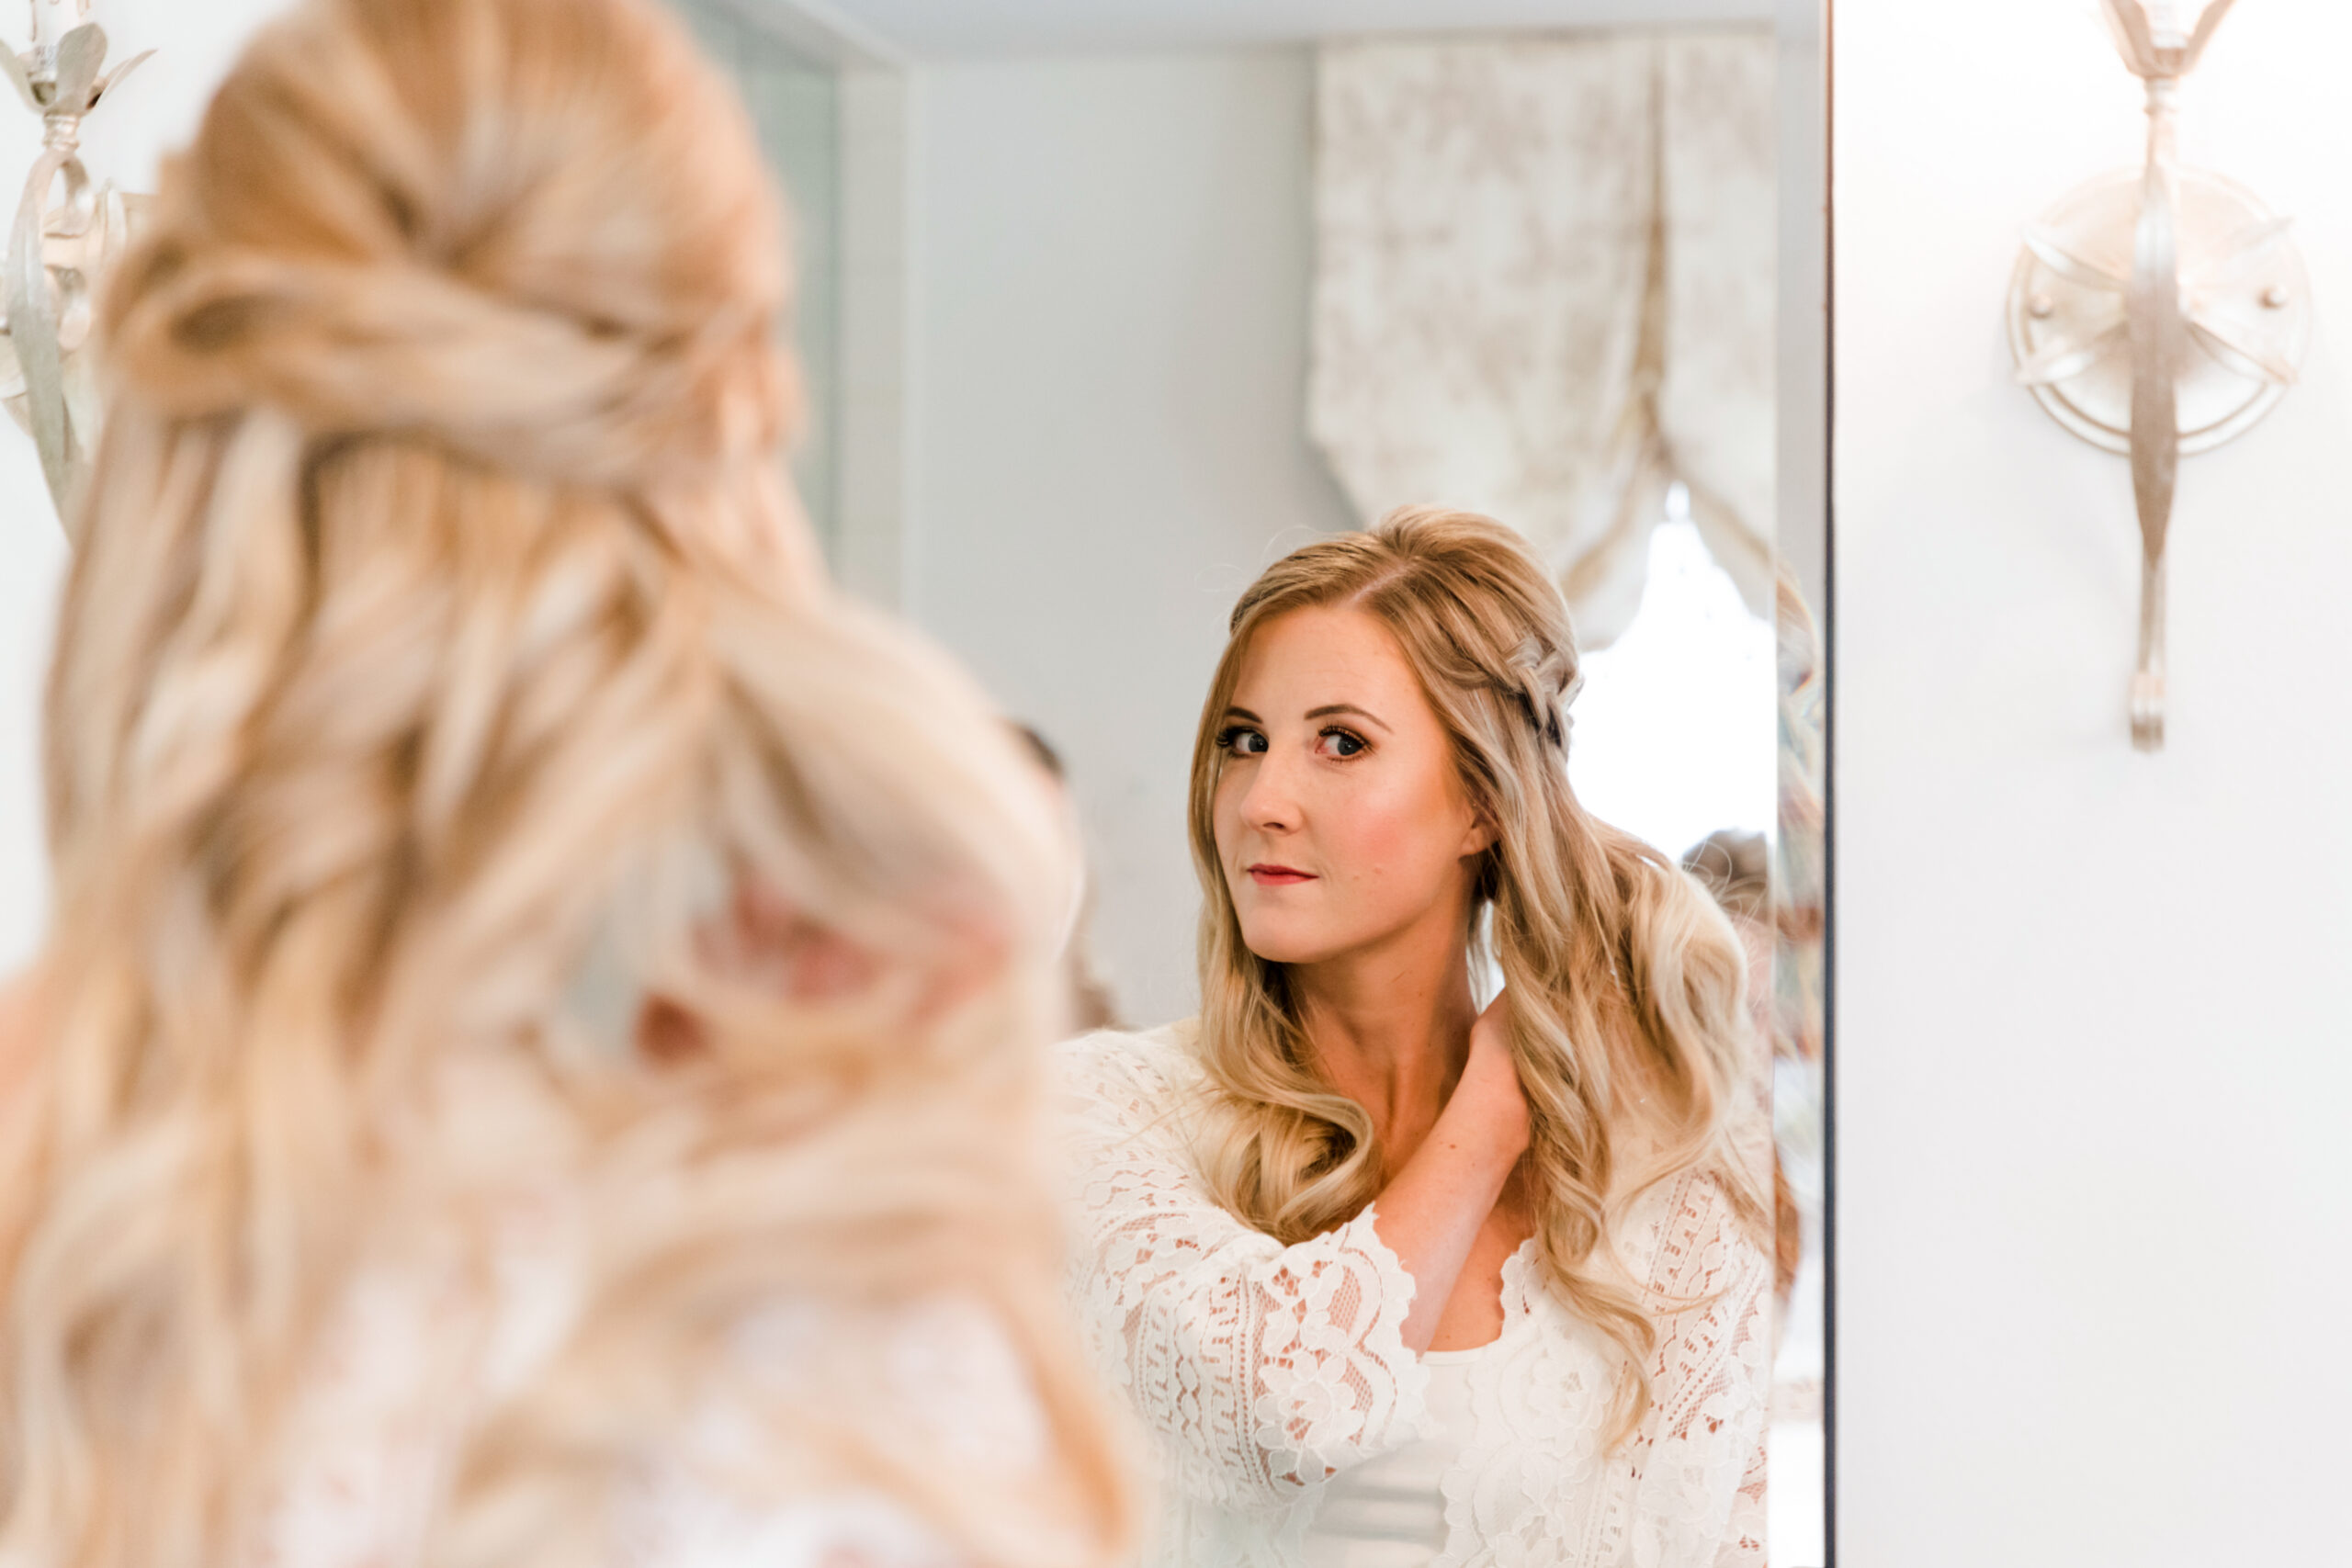 A bride gets ready for her wedding.